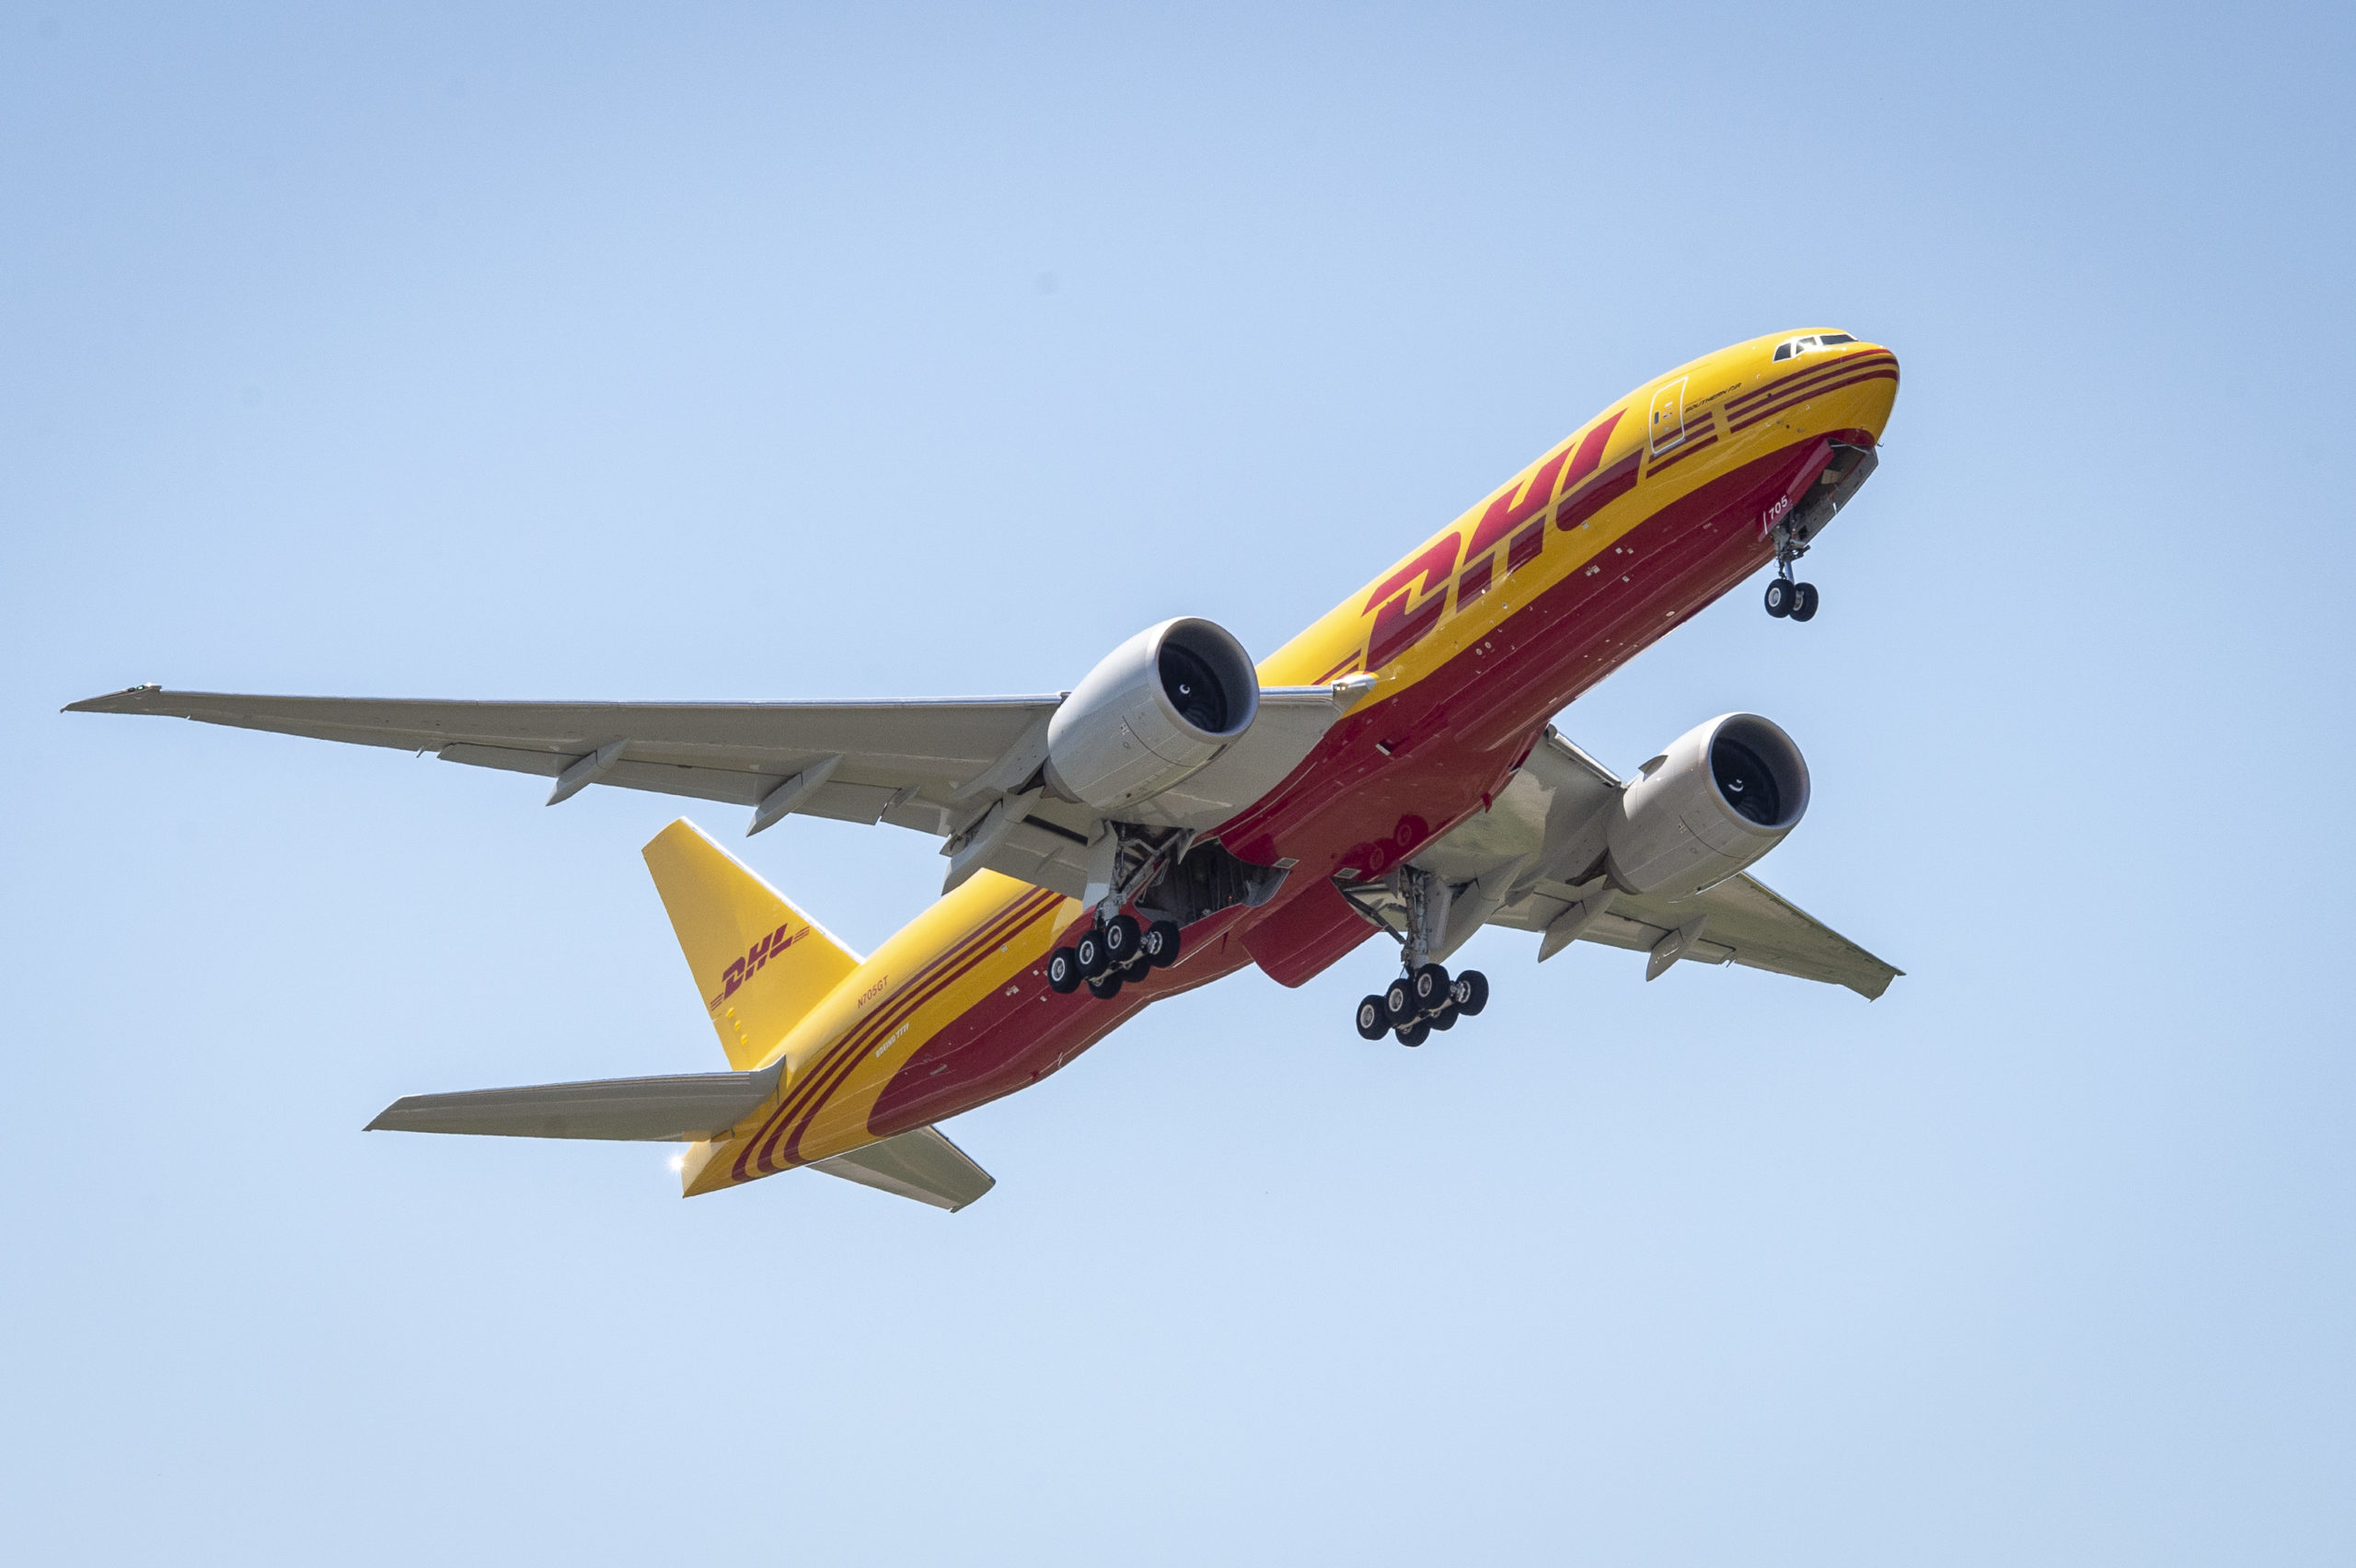 DHL 777 Freighter Delivery Cruise, Ribbon Cuttiing & Flyaway